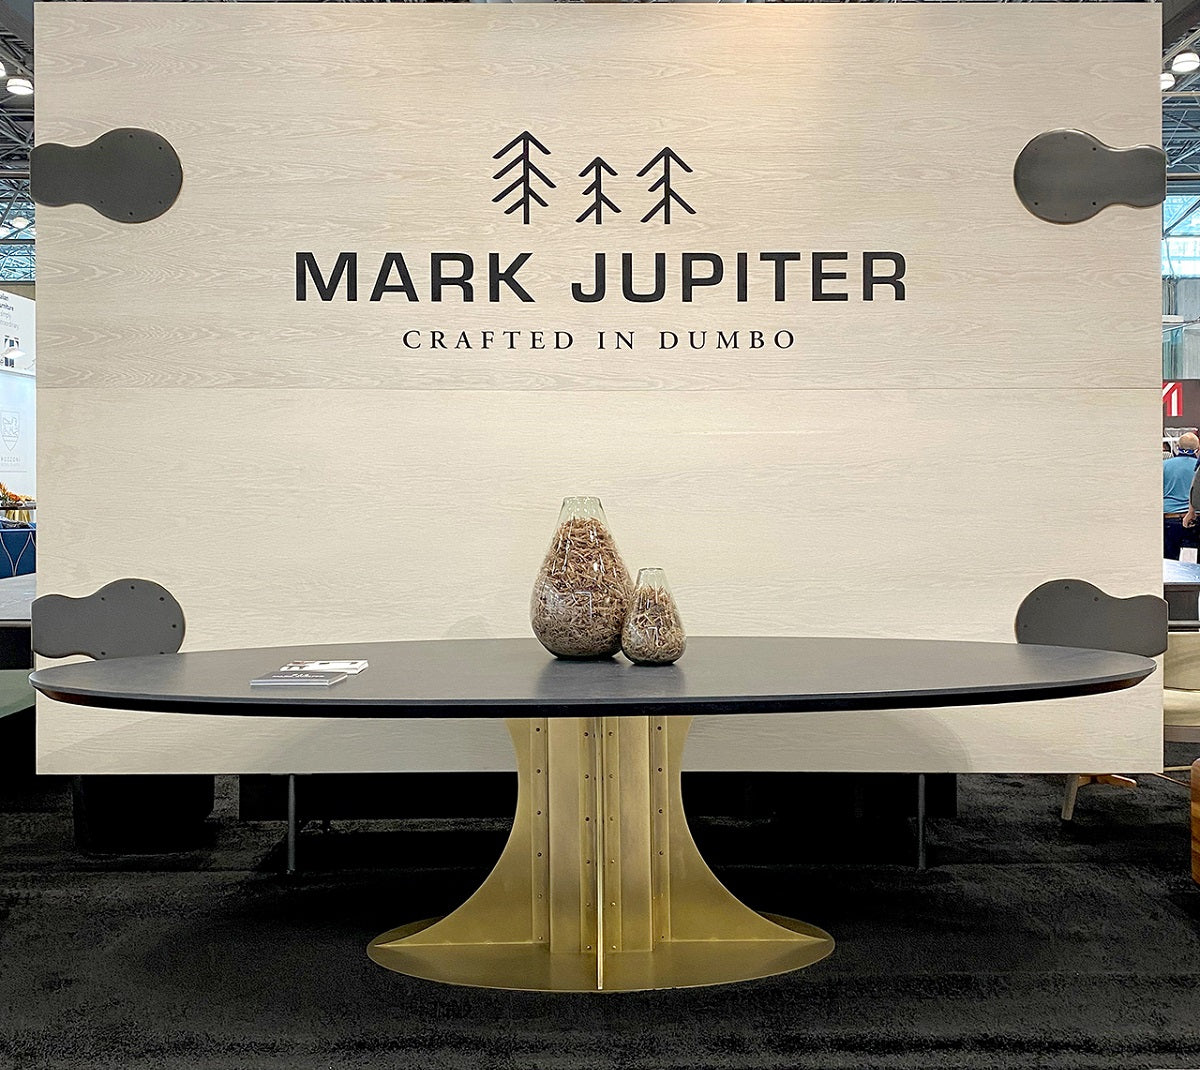 Mark Jupiter headquarters with custom table in the foreground.